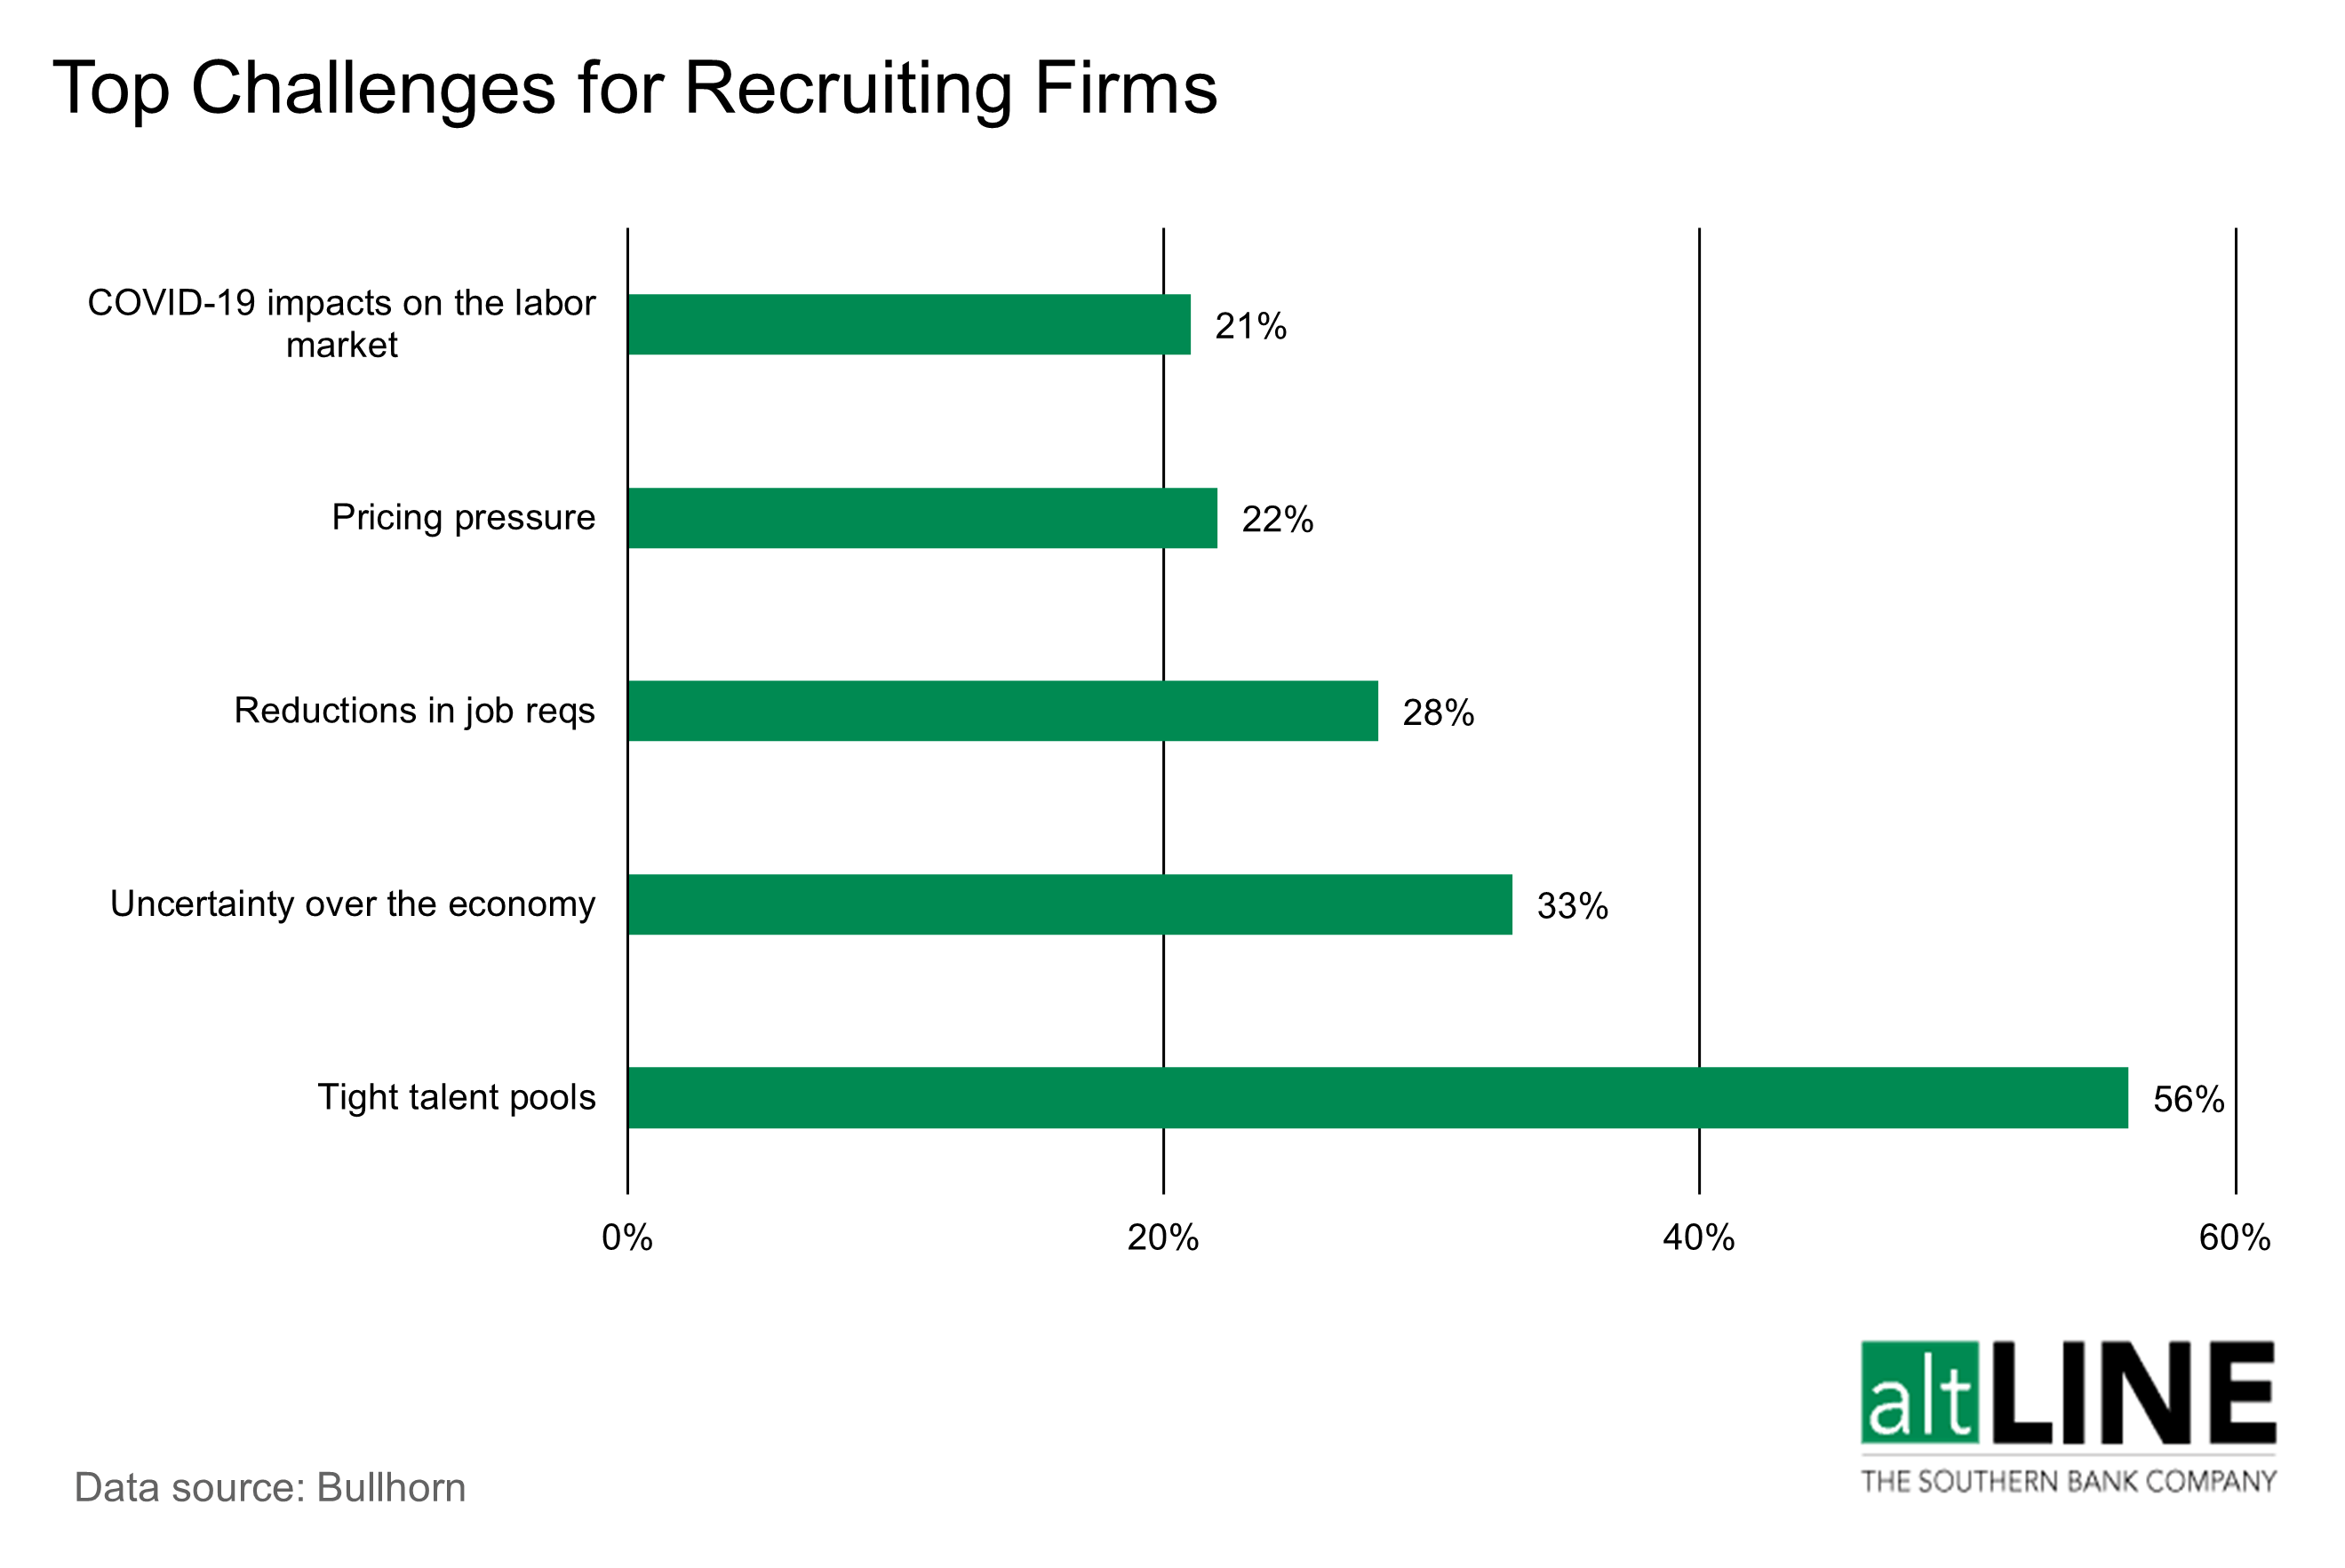 bar chart showing the top challenges for recruiting firms